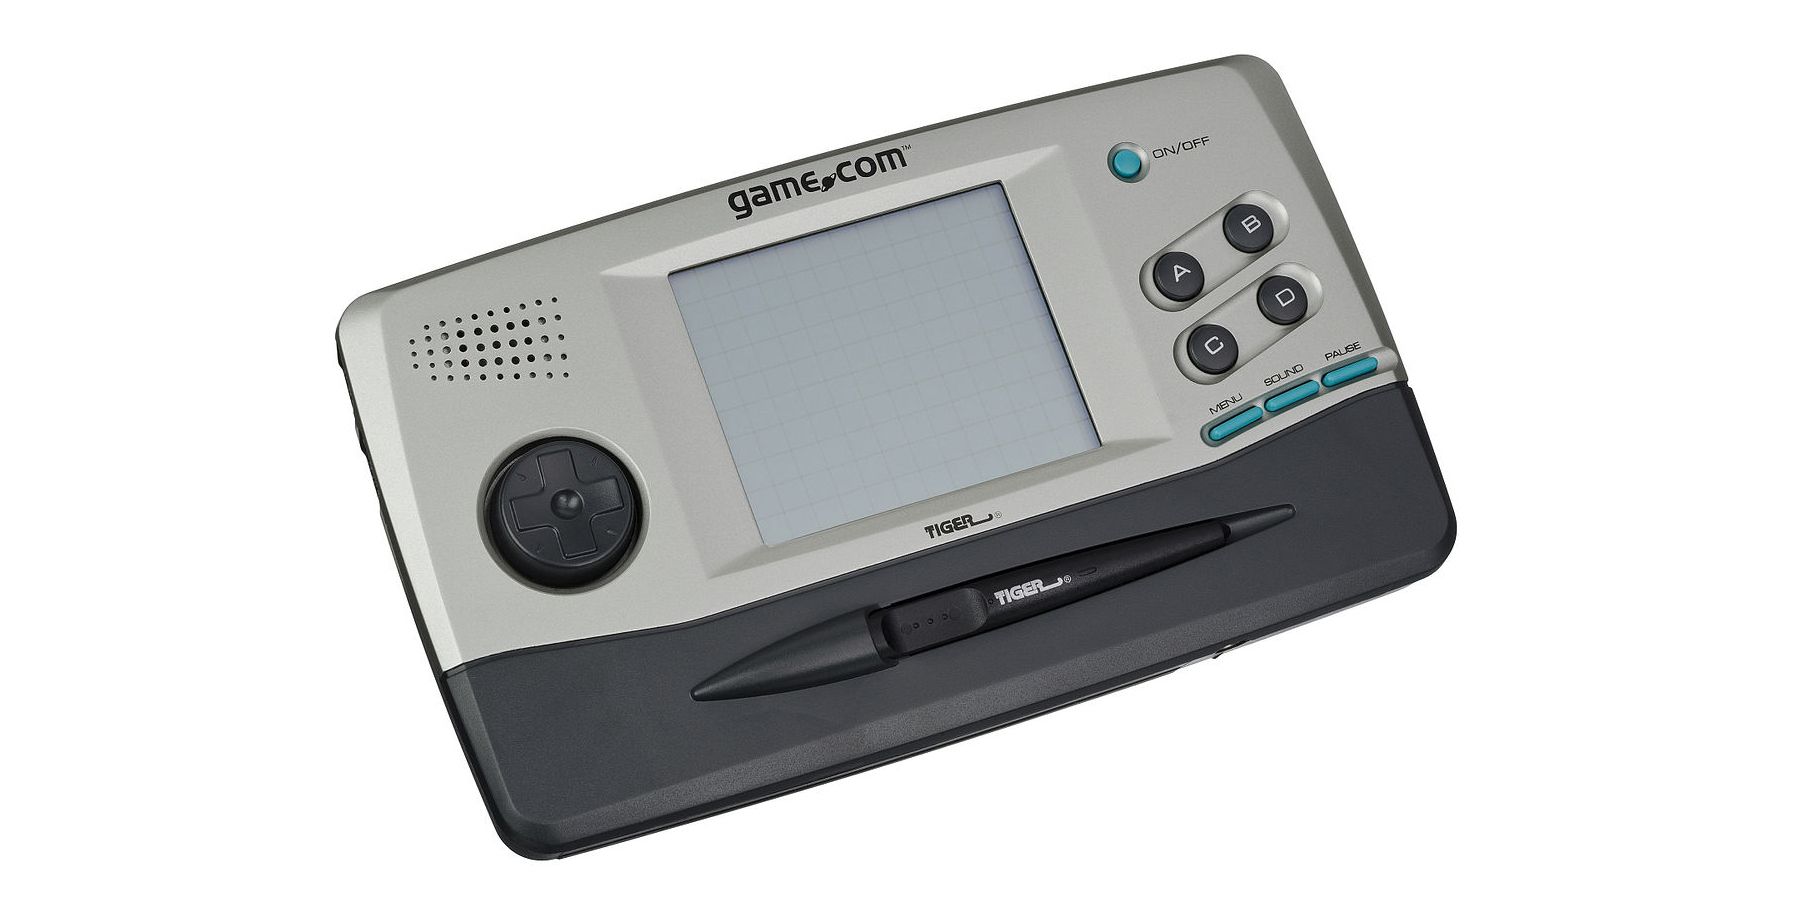 A photo showing the Tiger Game.com handheld game console